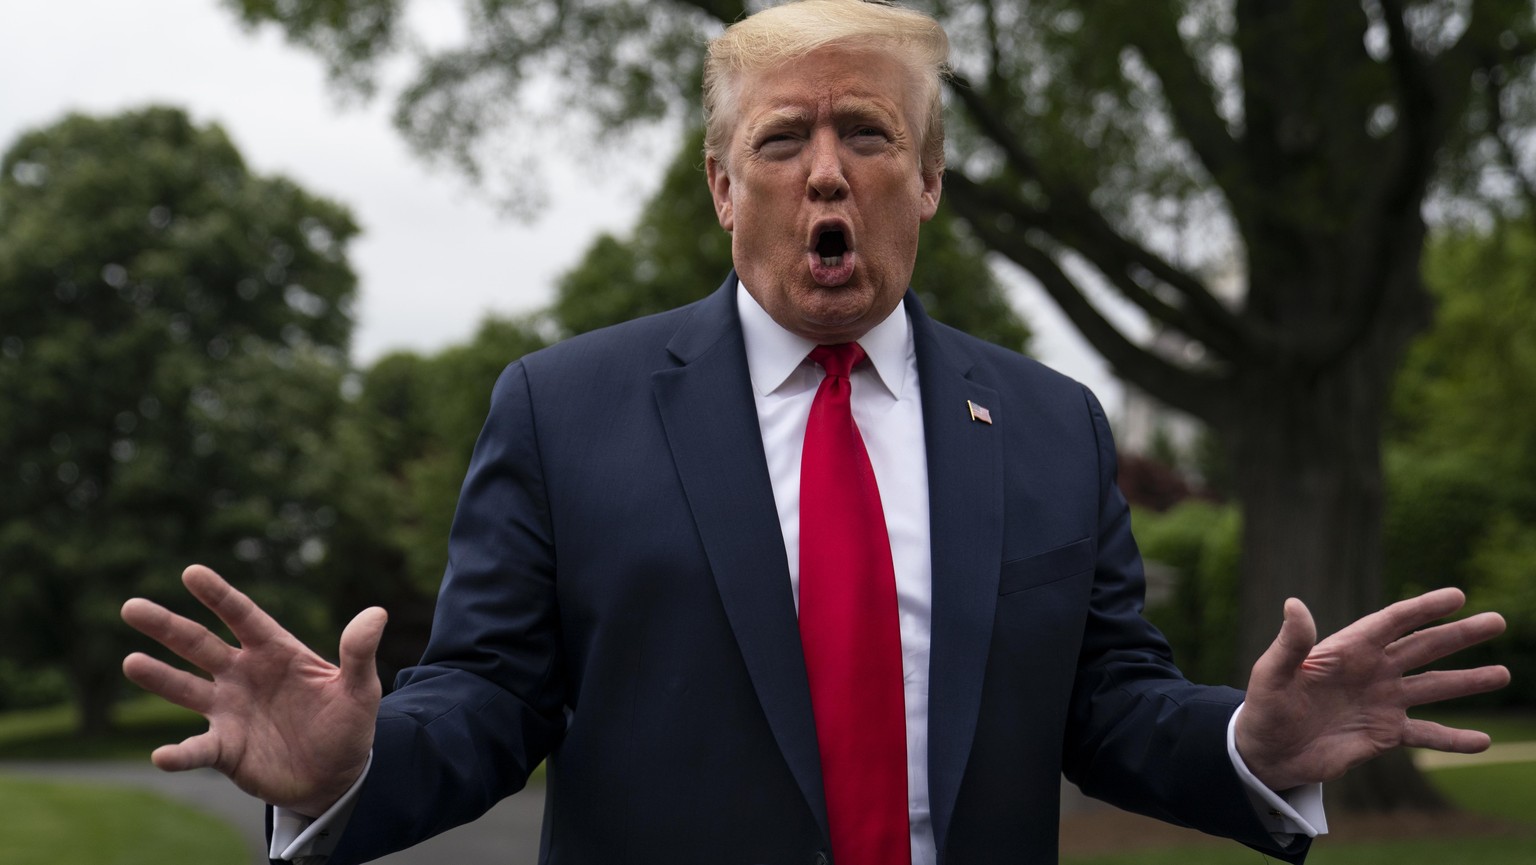 President Donald Trump talks to reporters before departing the White House for a trip to Michigan, Thursday, May 21, 2020, in Washington. (AP Photo/Evan Vucci)
Donald Trump